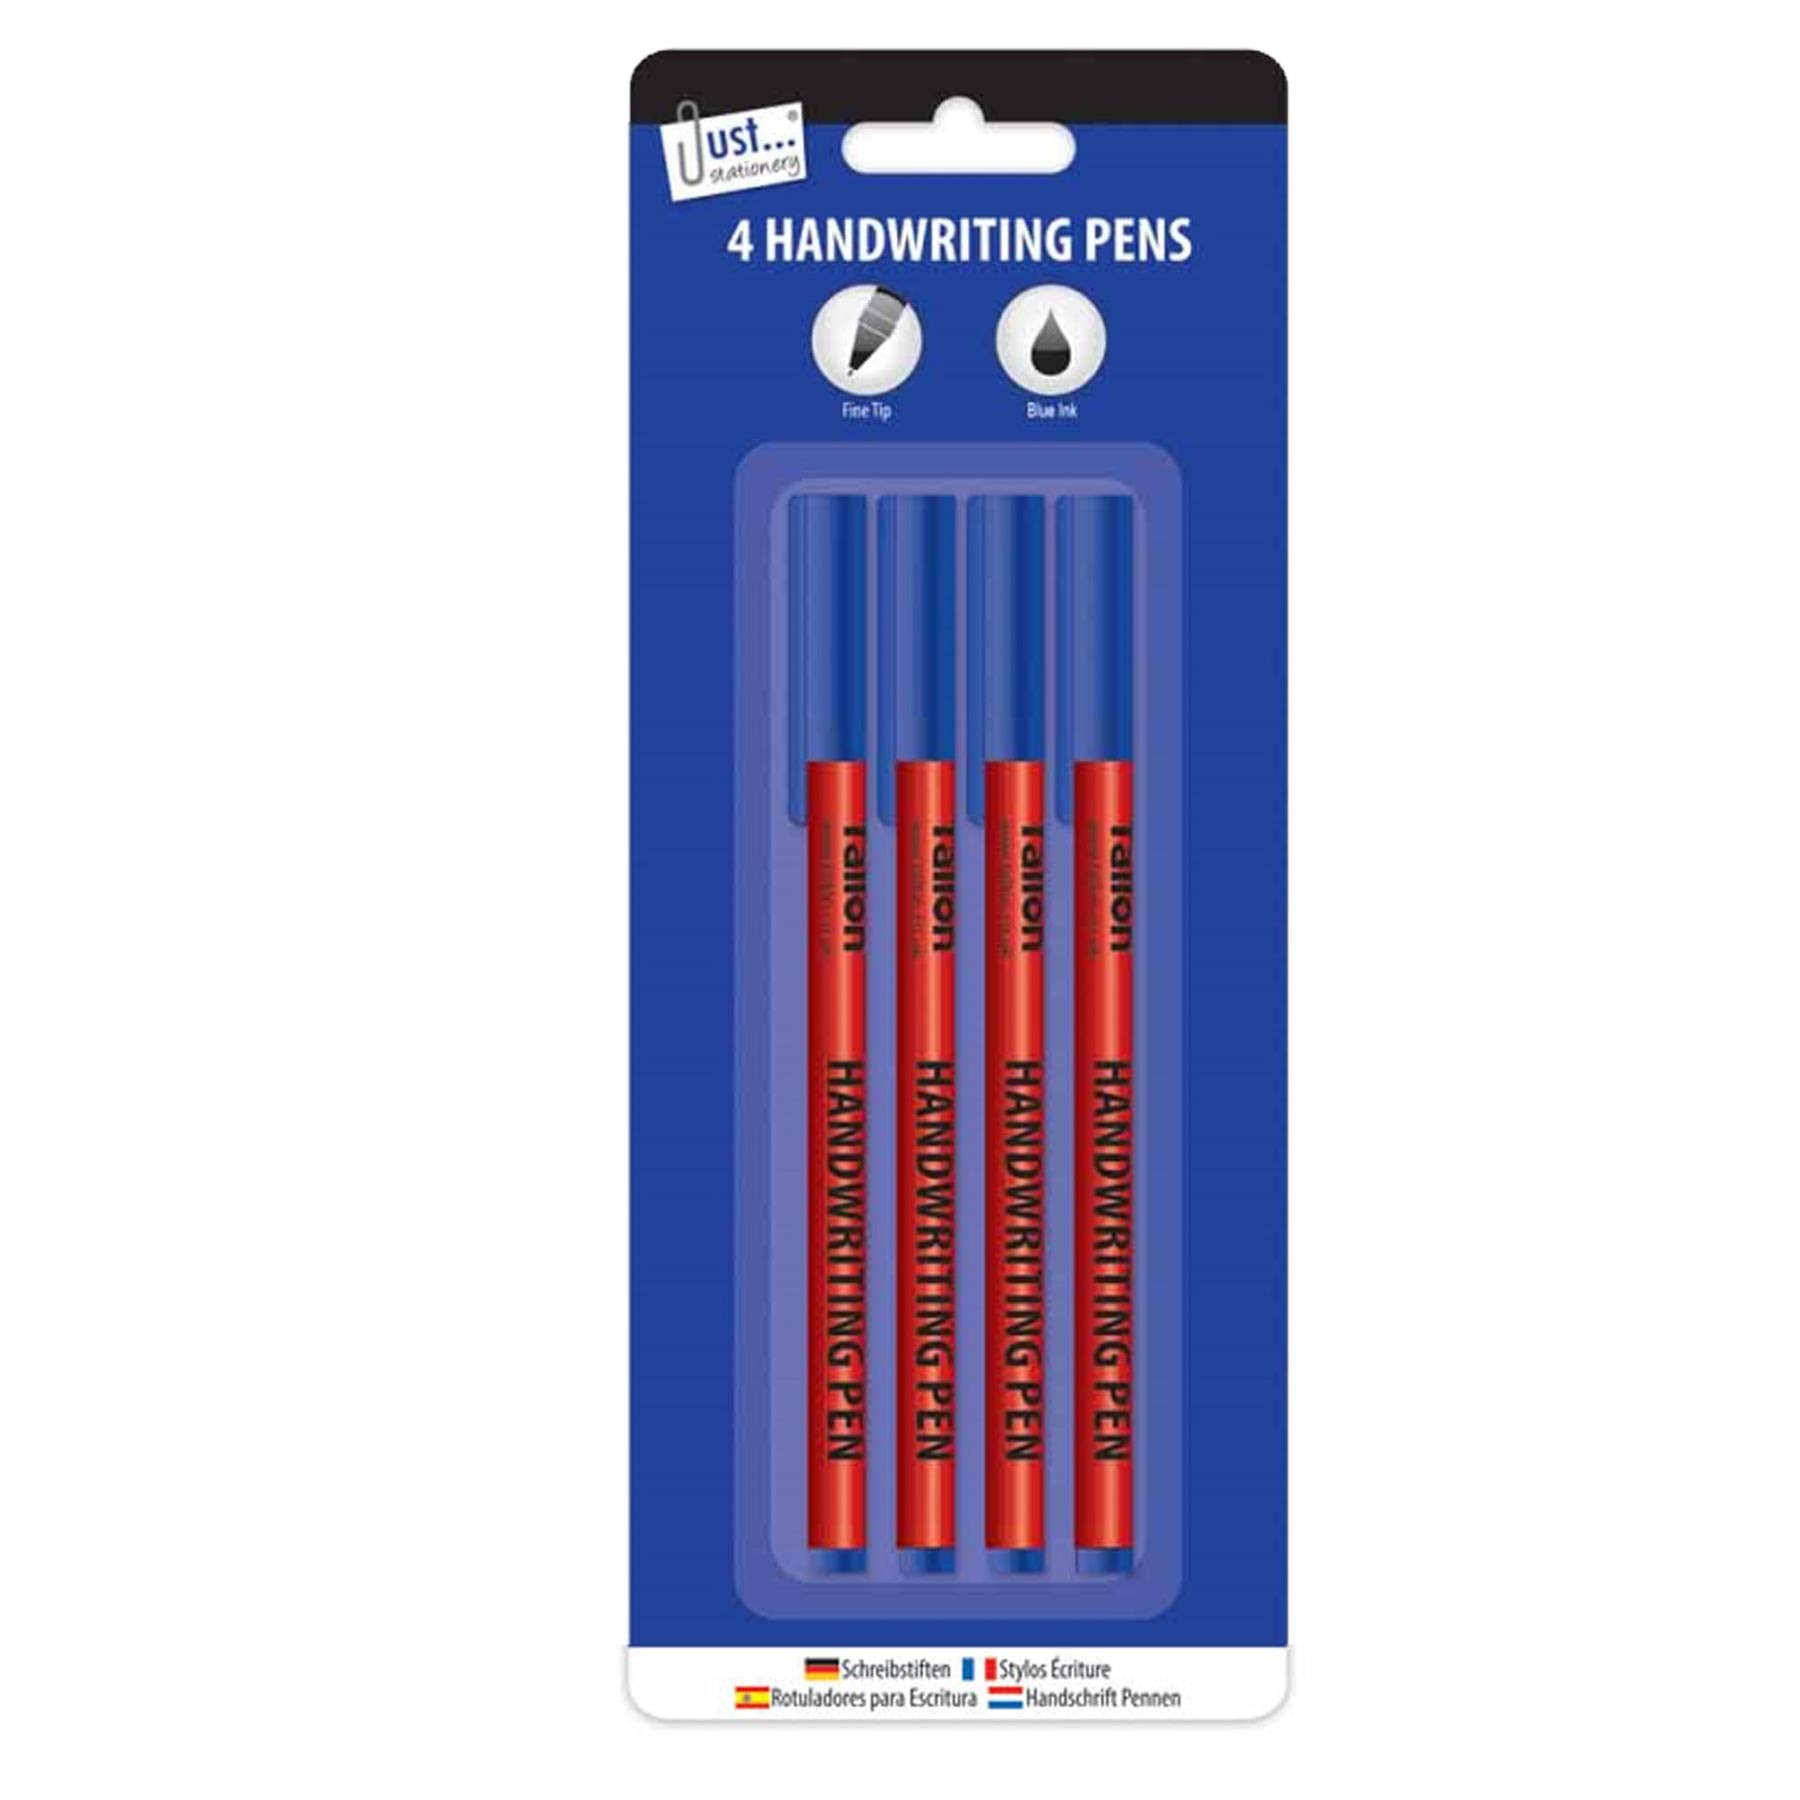 Pack of 4 Blue Ink Hand Writing Pens